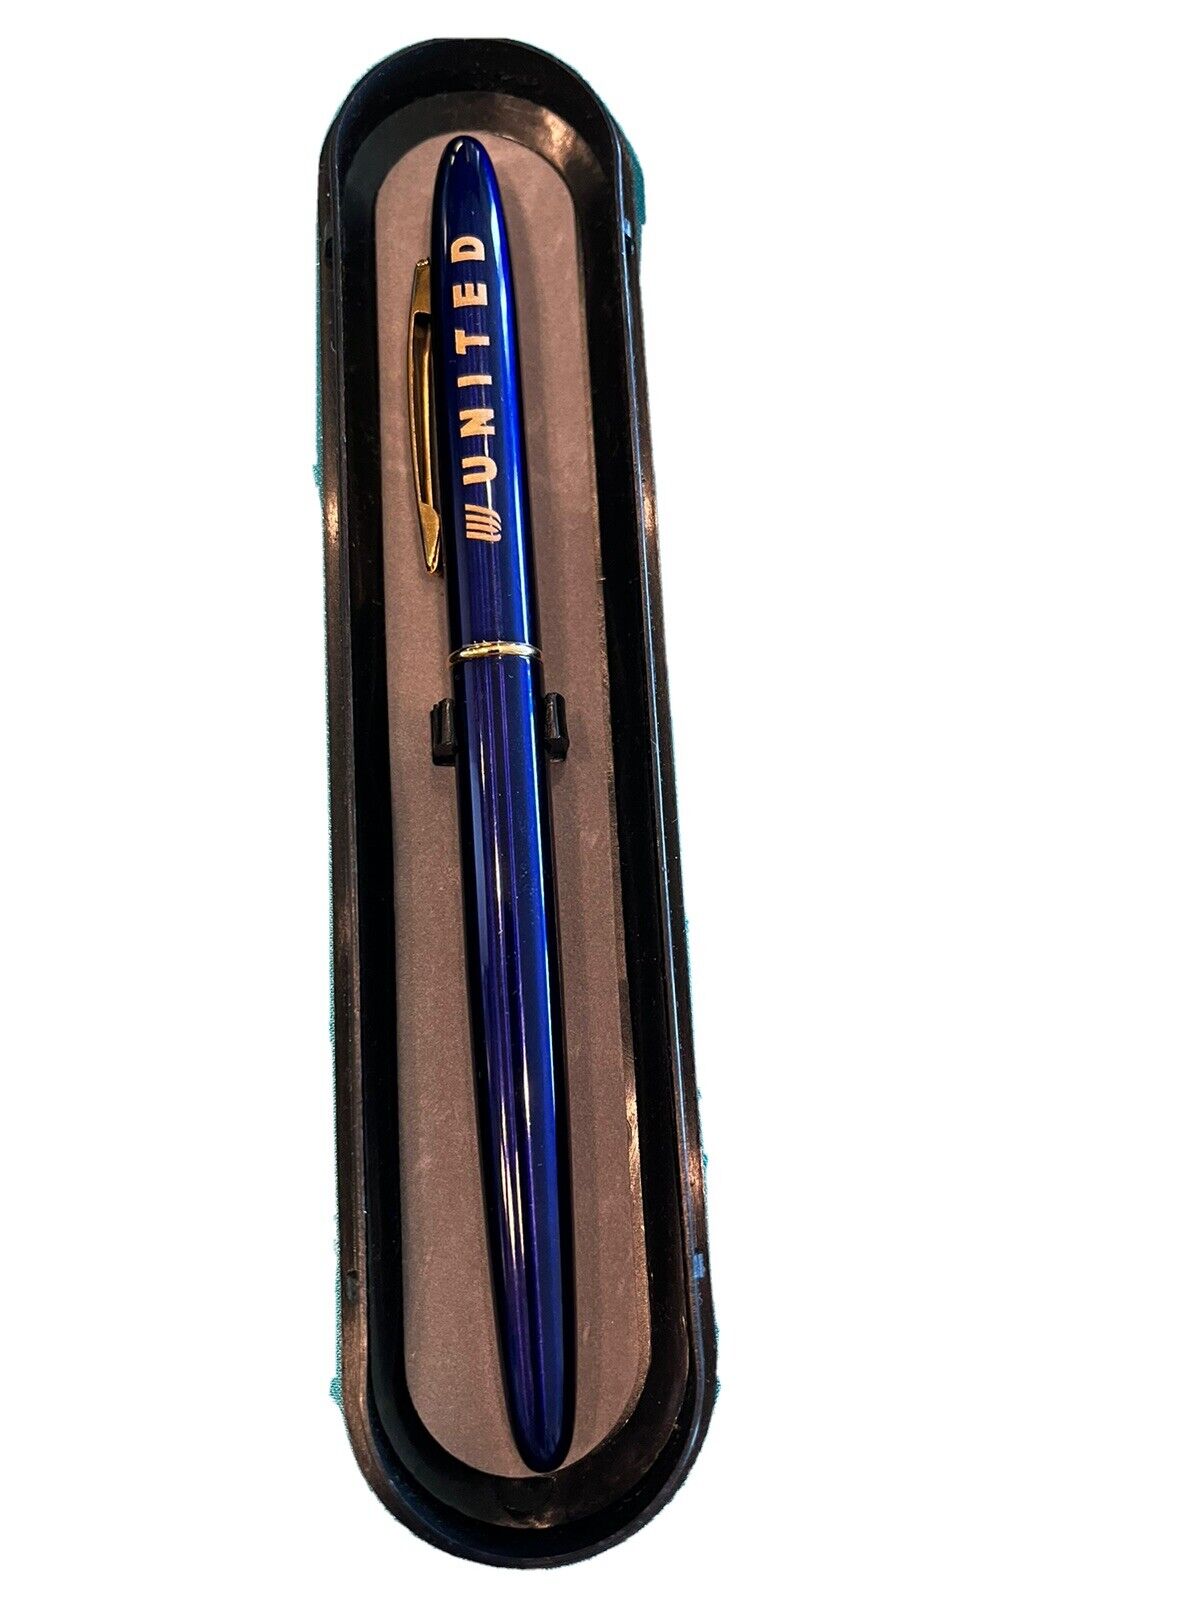 United Airlines Vintage Blue w/ Gold Executive Pen